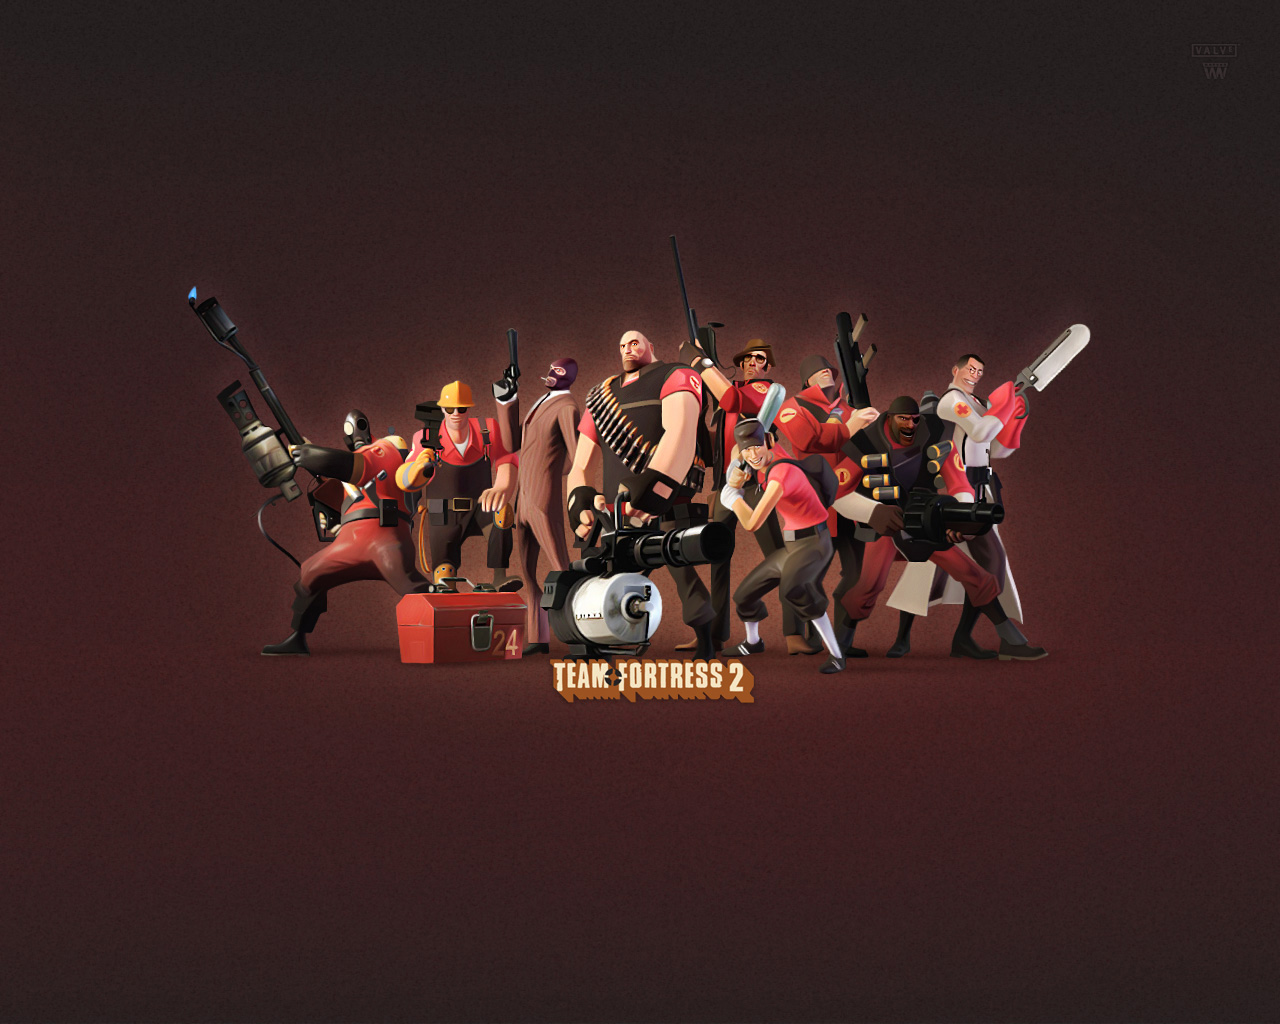 team fortress 2, video game, demoman (team fortress), engineer (team fortress), heavy (team fortress), medic (team fortress), pyro (team fortress), scout (team fortress), sniper (team fortress), soldier (team fortress), spy (team fortress)